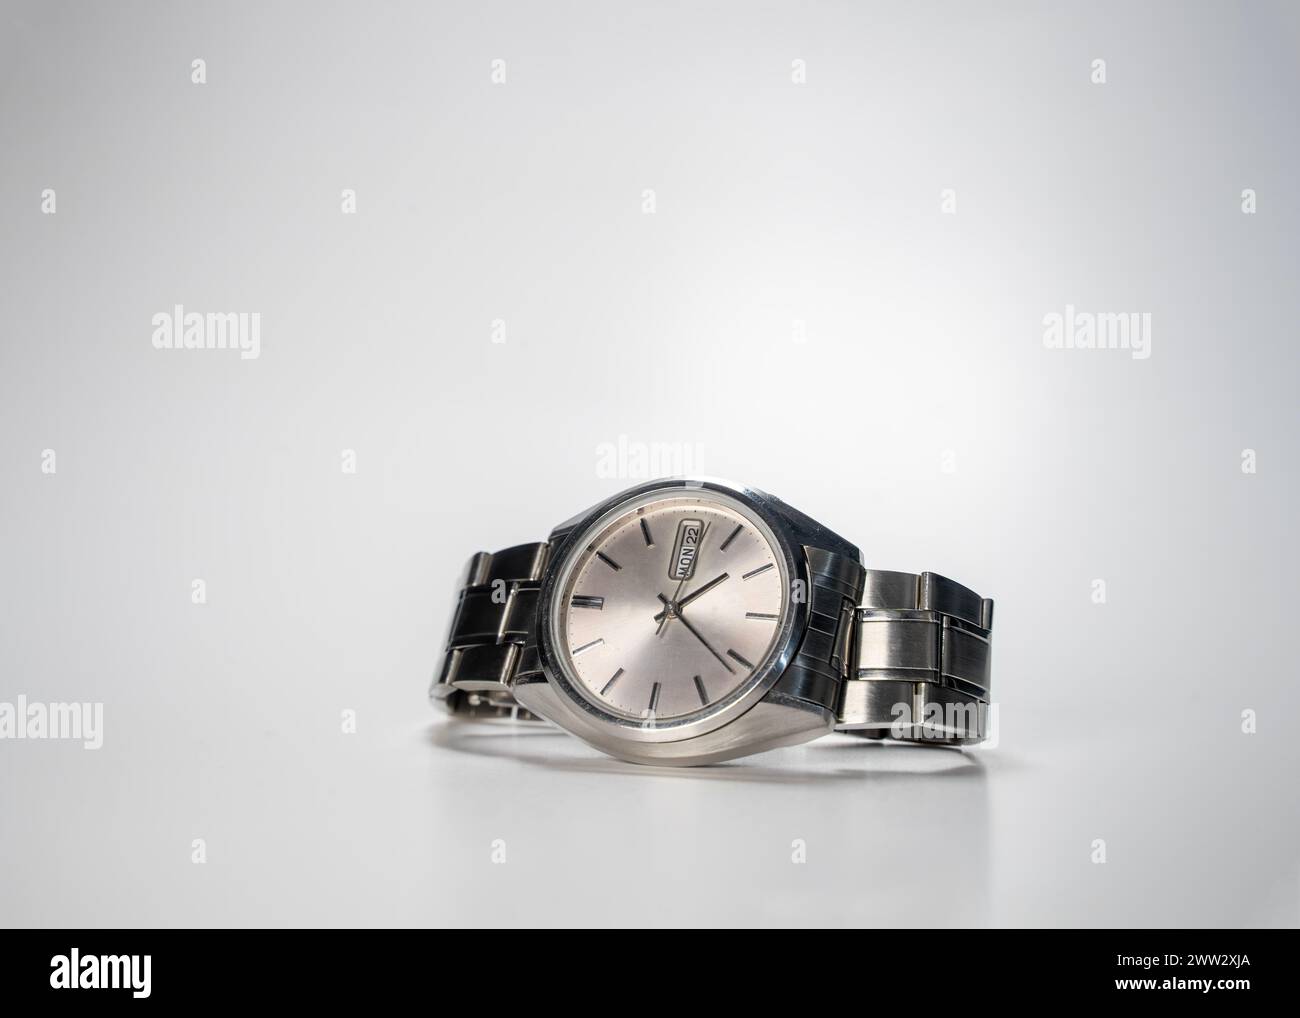 Vintage Automatic Watch, Isolated On Gray Surface Stock Photo